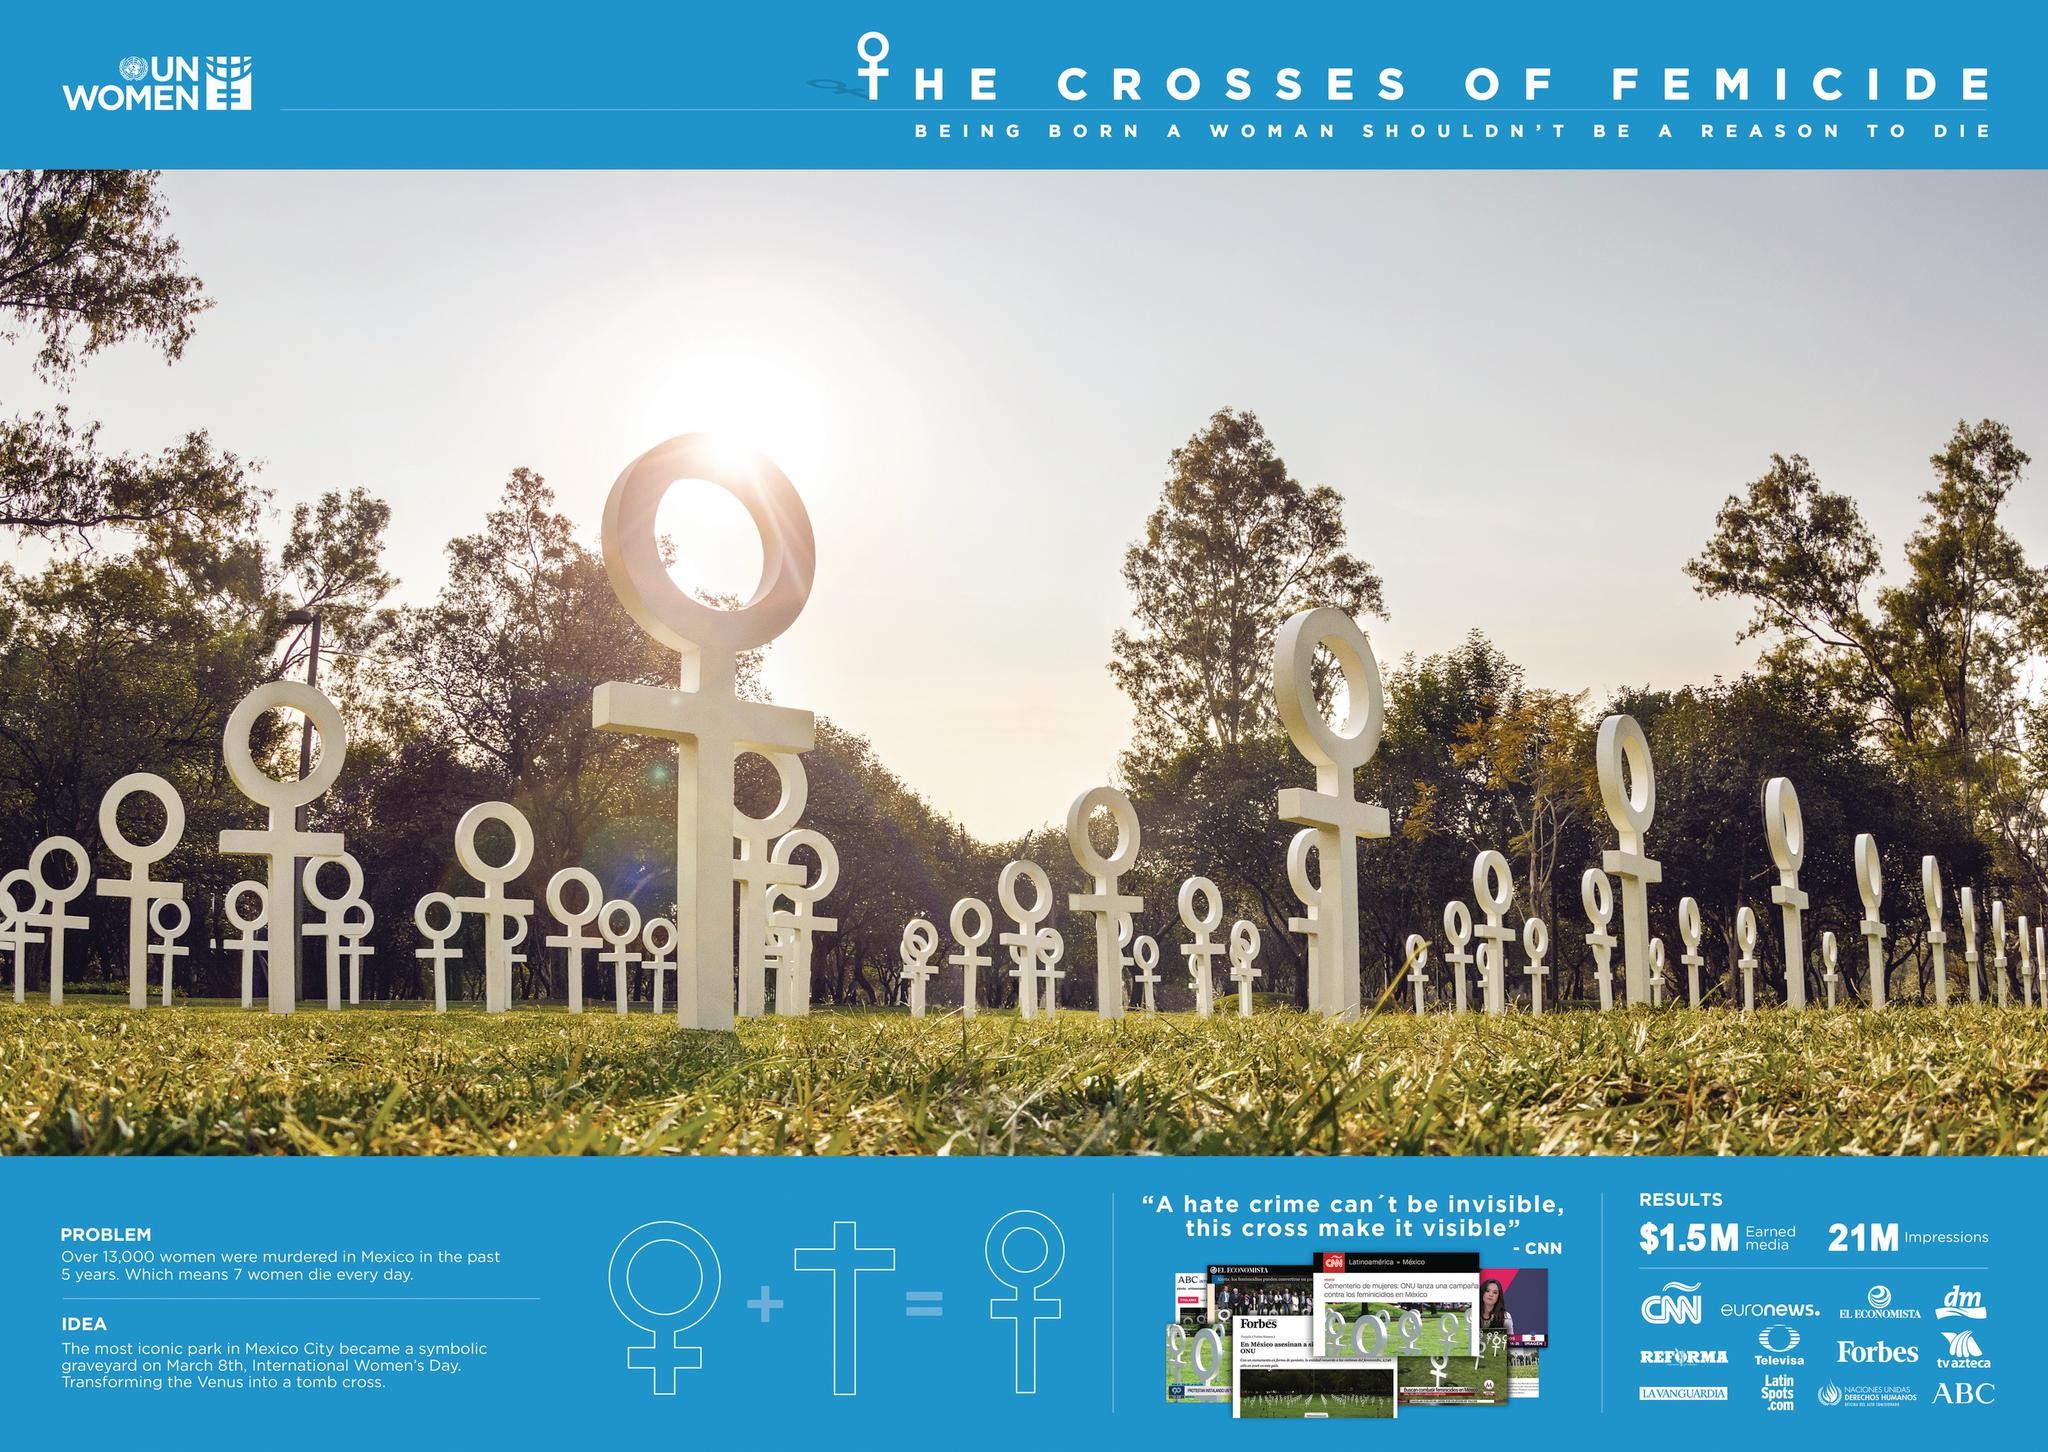 The Crosses of Femicide